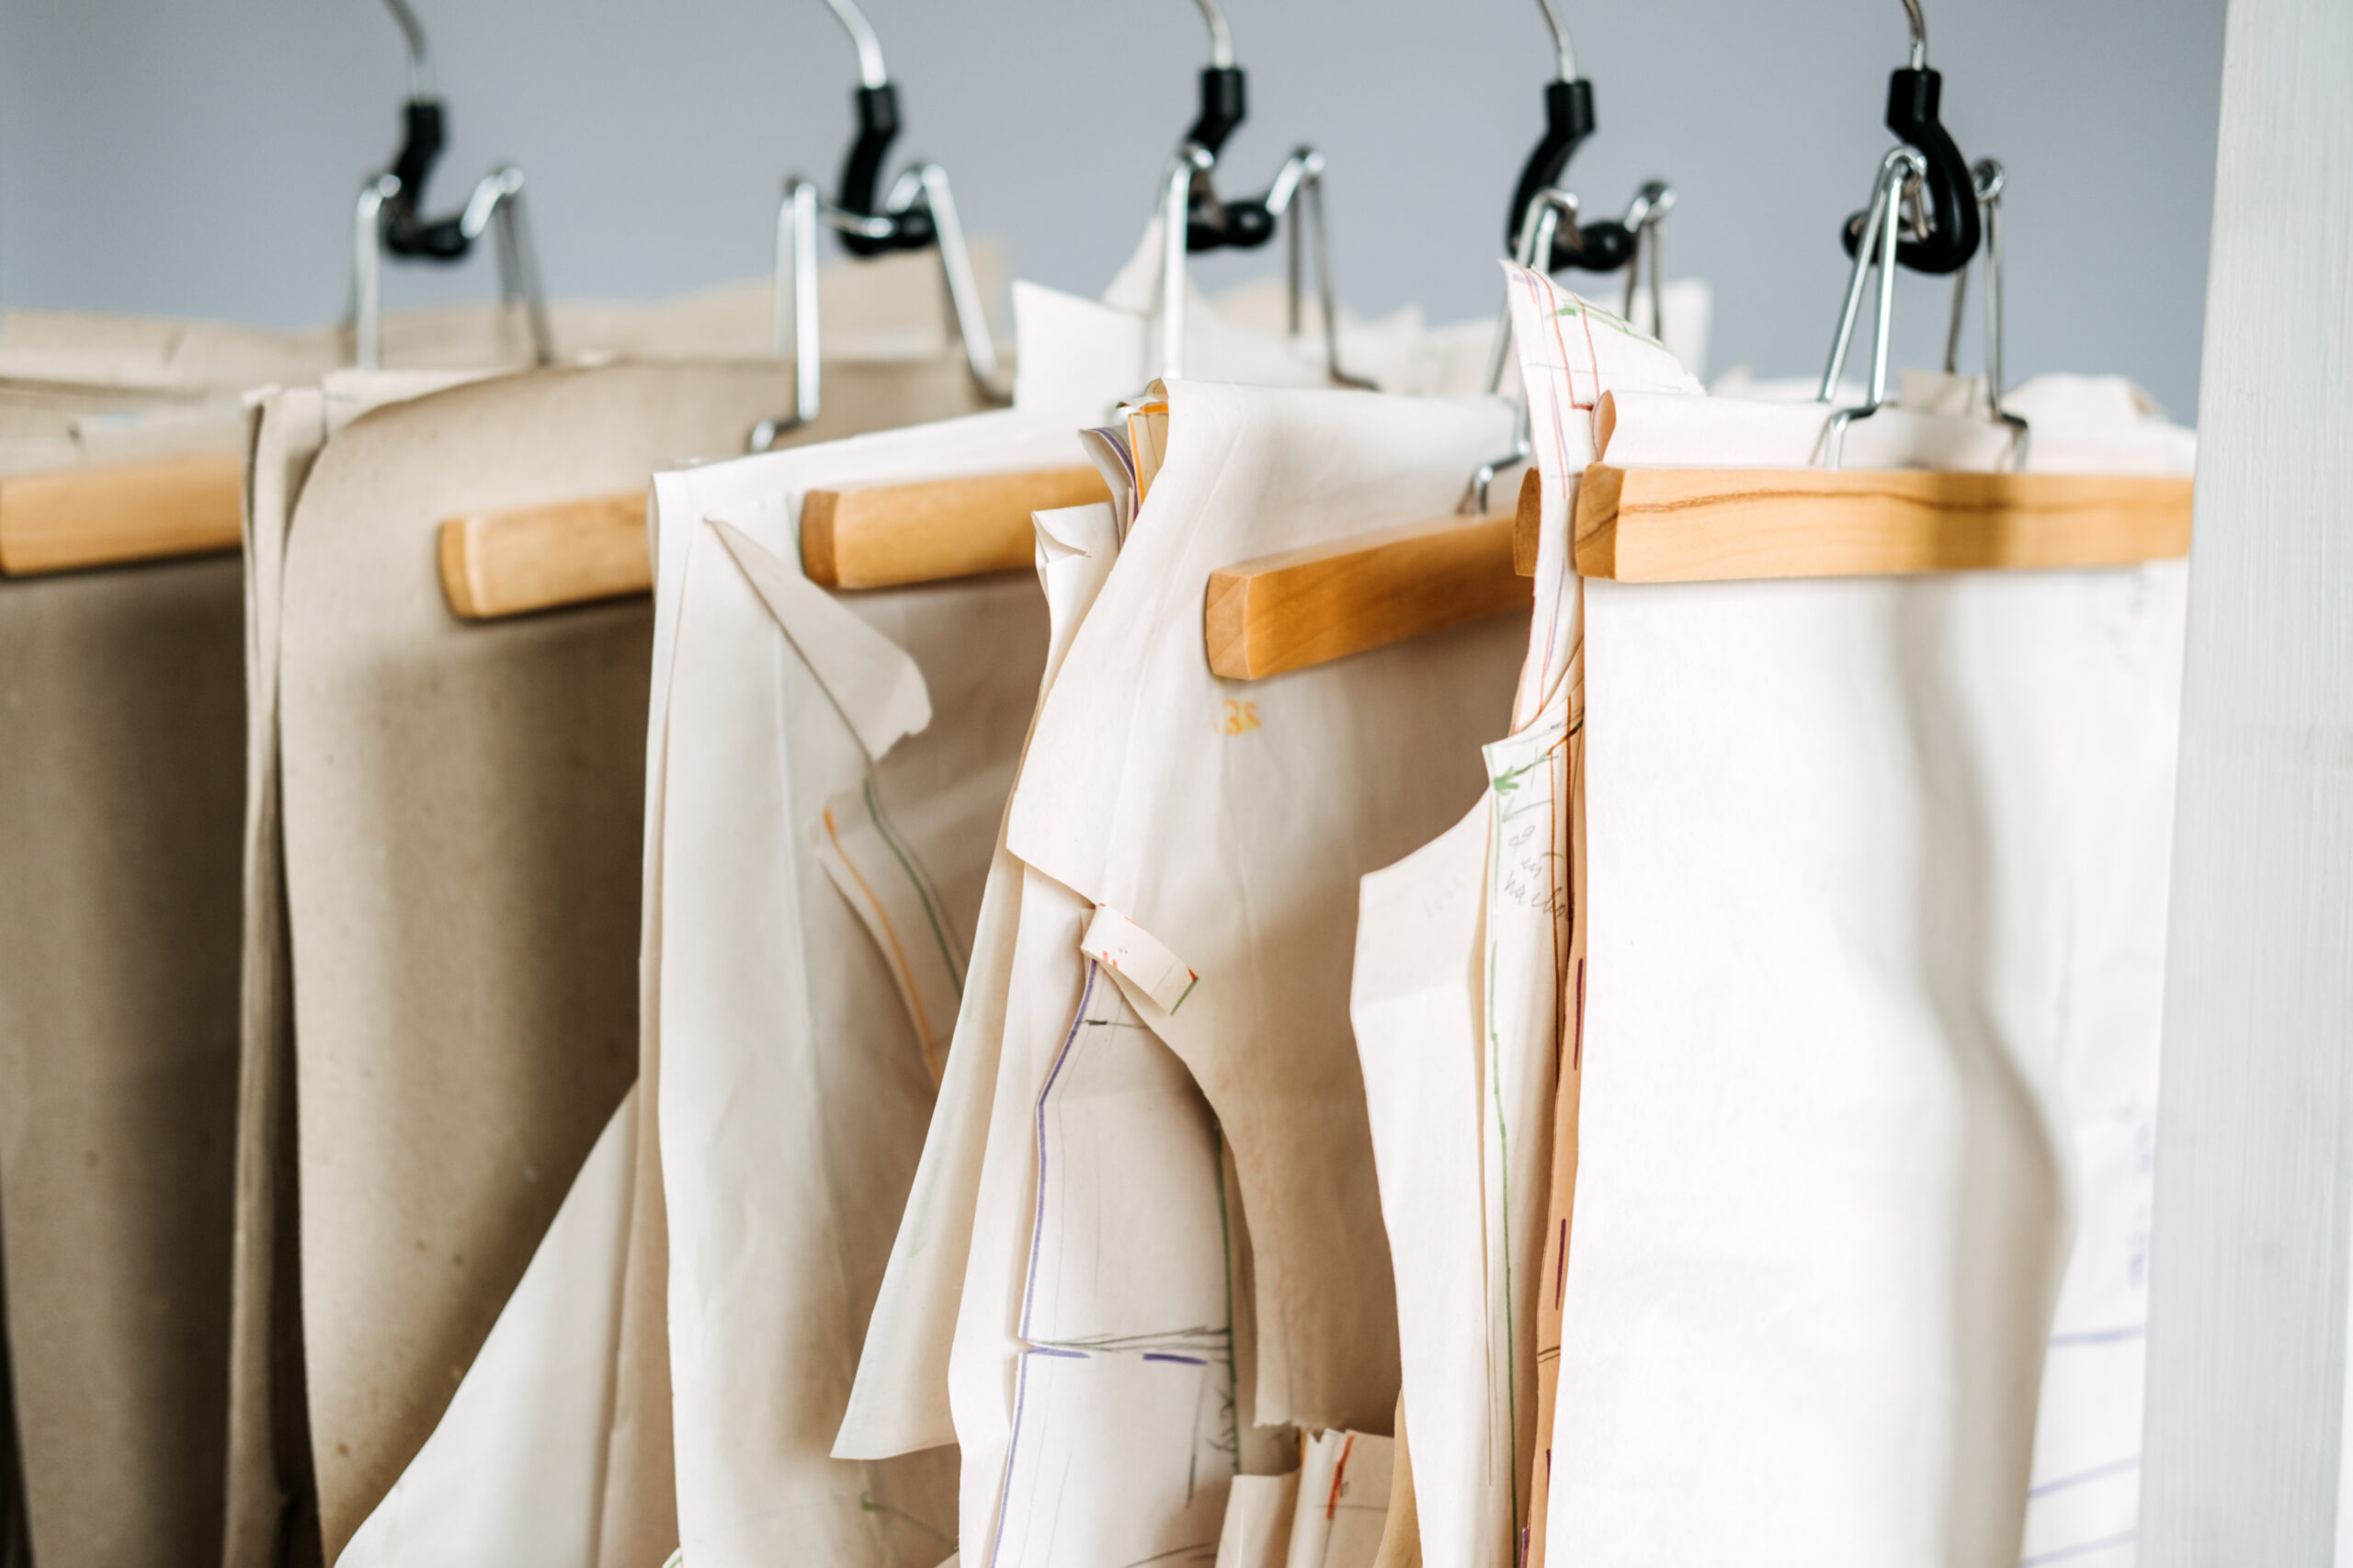 Many paper sewing patterns for different clothes hanging on the rack in sewing factory background. Clothing pattern, manufacture on sewing factory. Tailoring, small business.